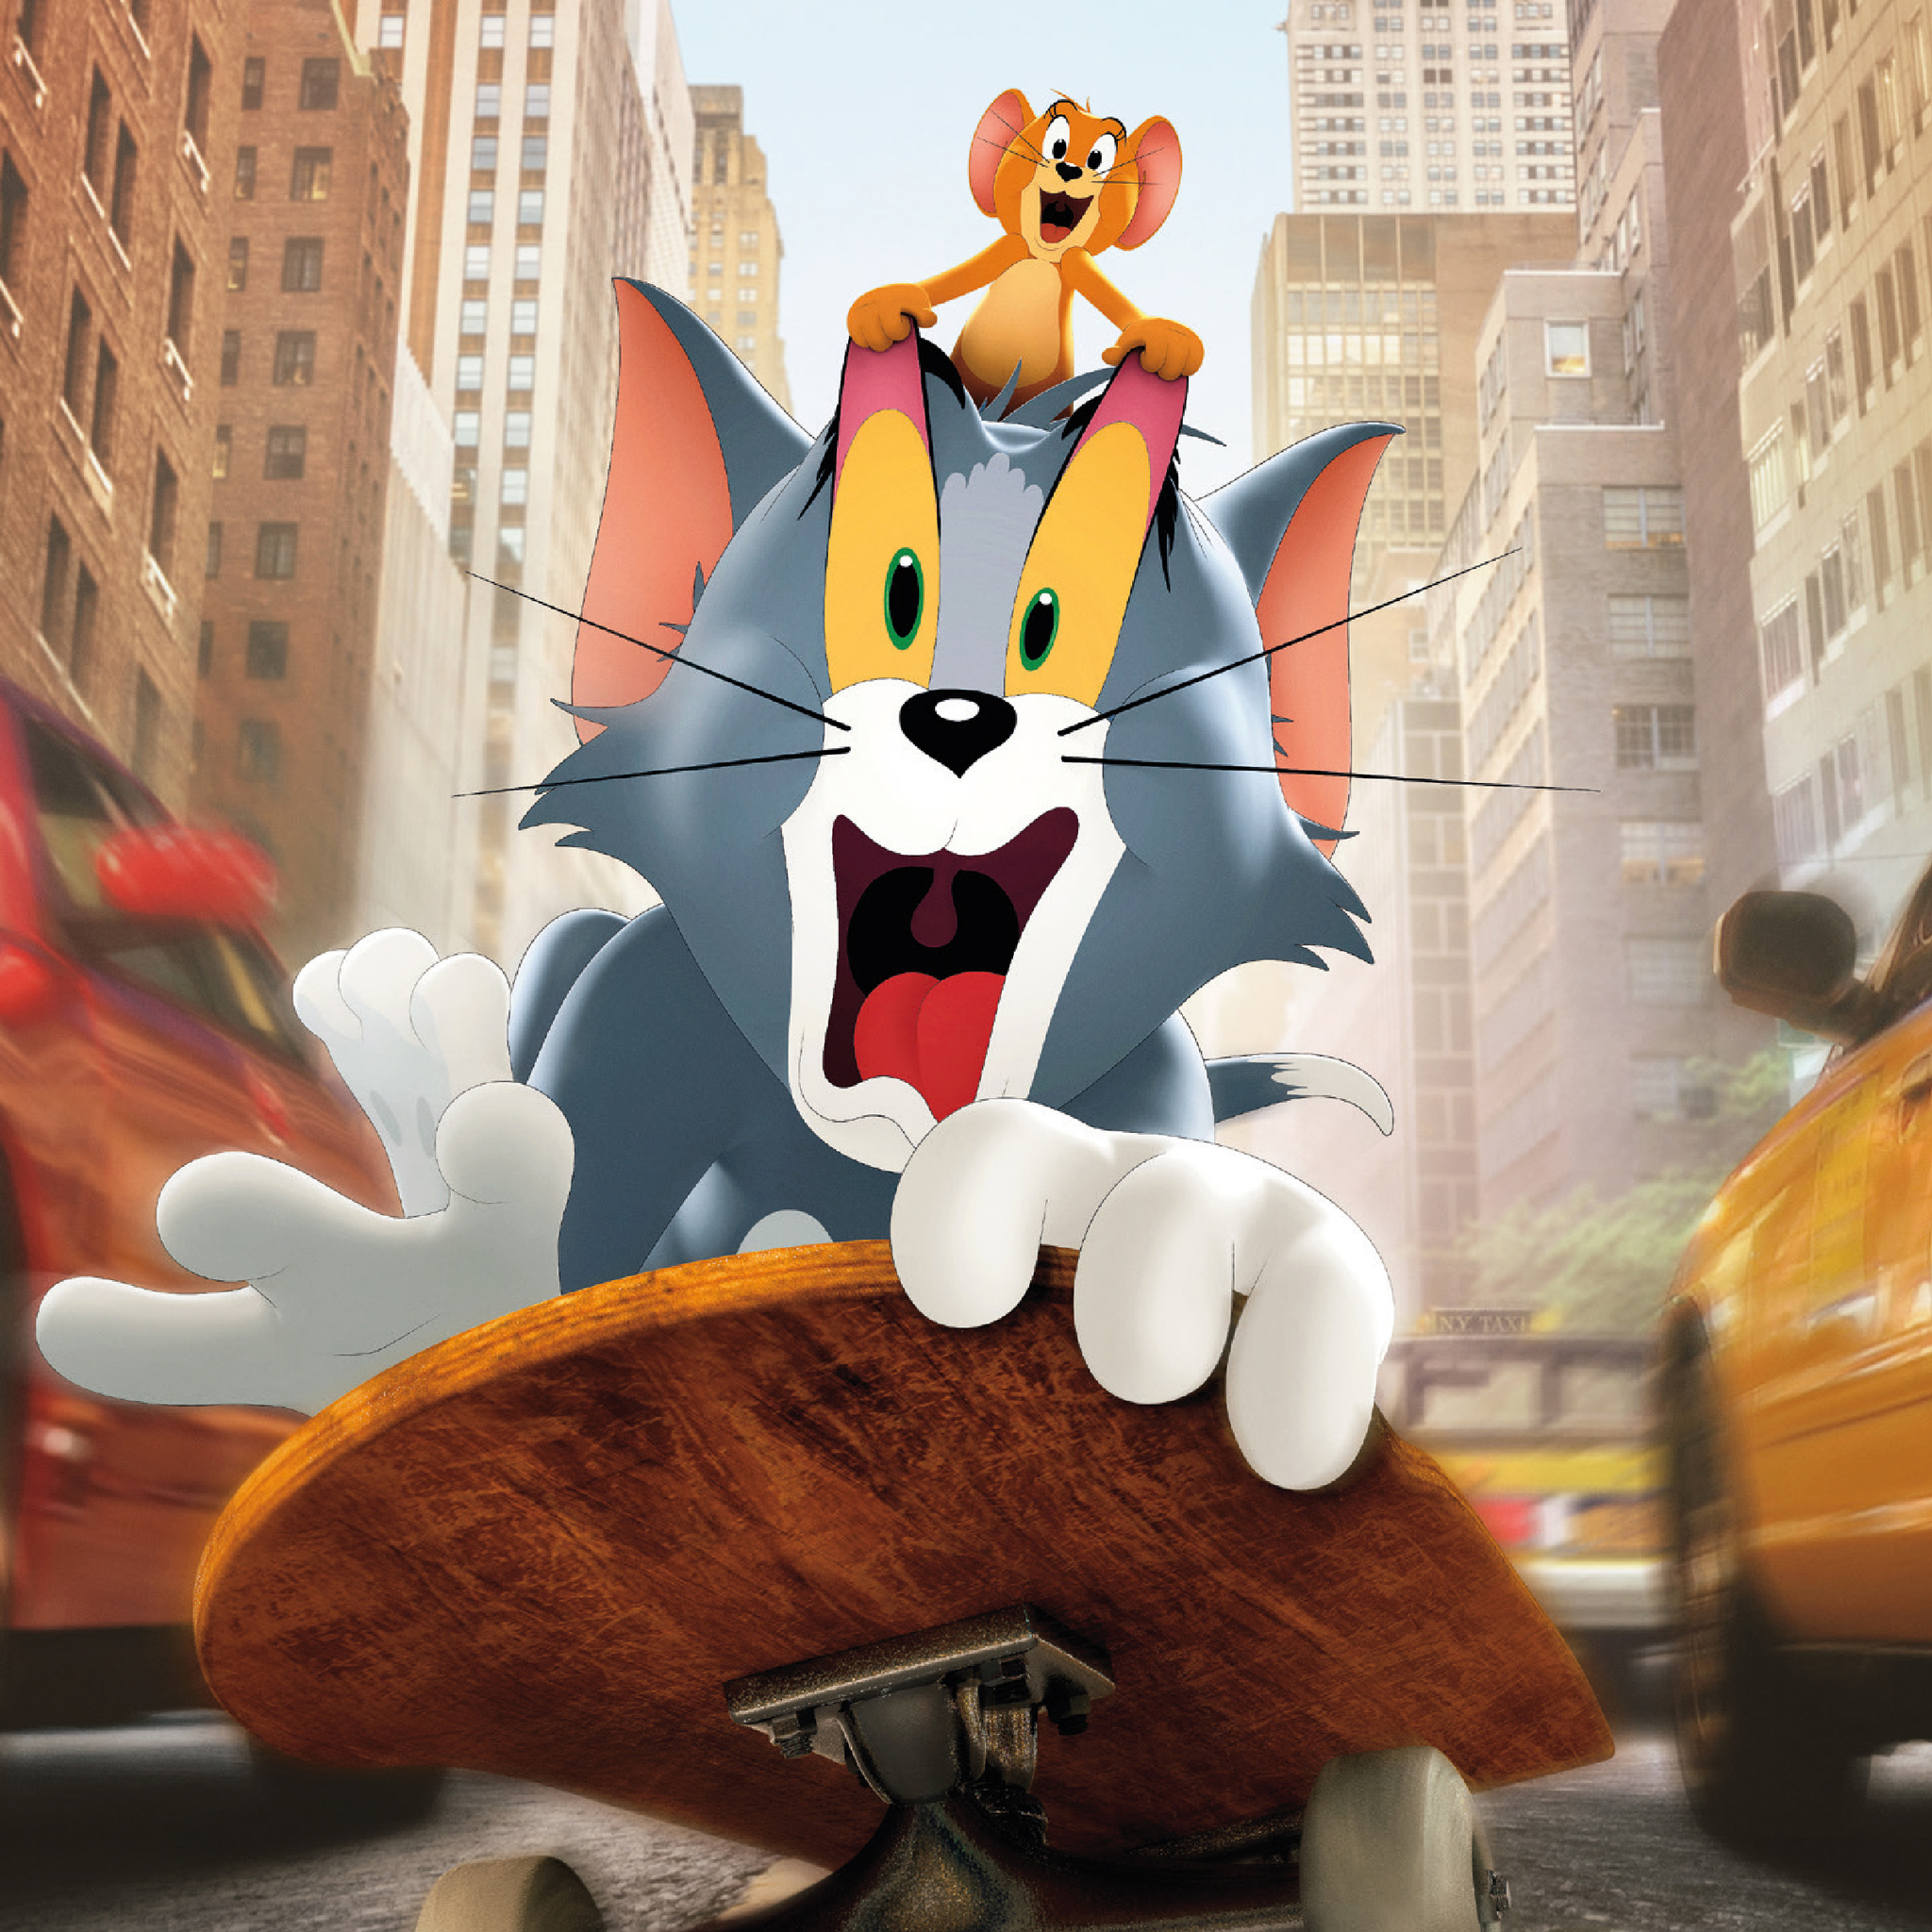 Tom And Jerry 2020 Movie Poster Wallpapers